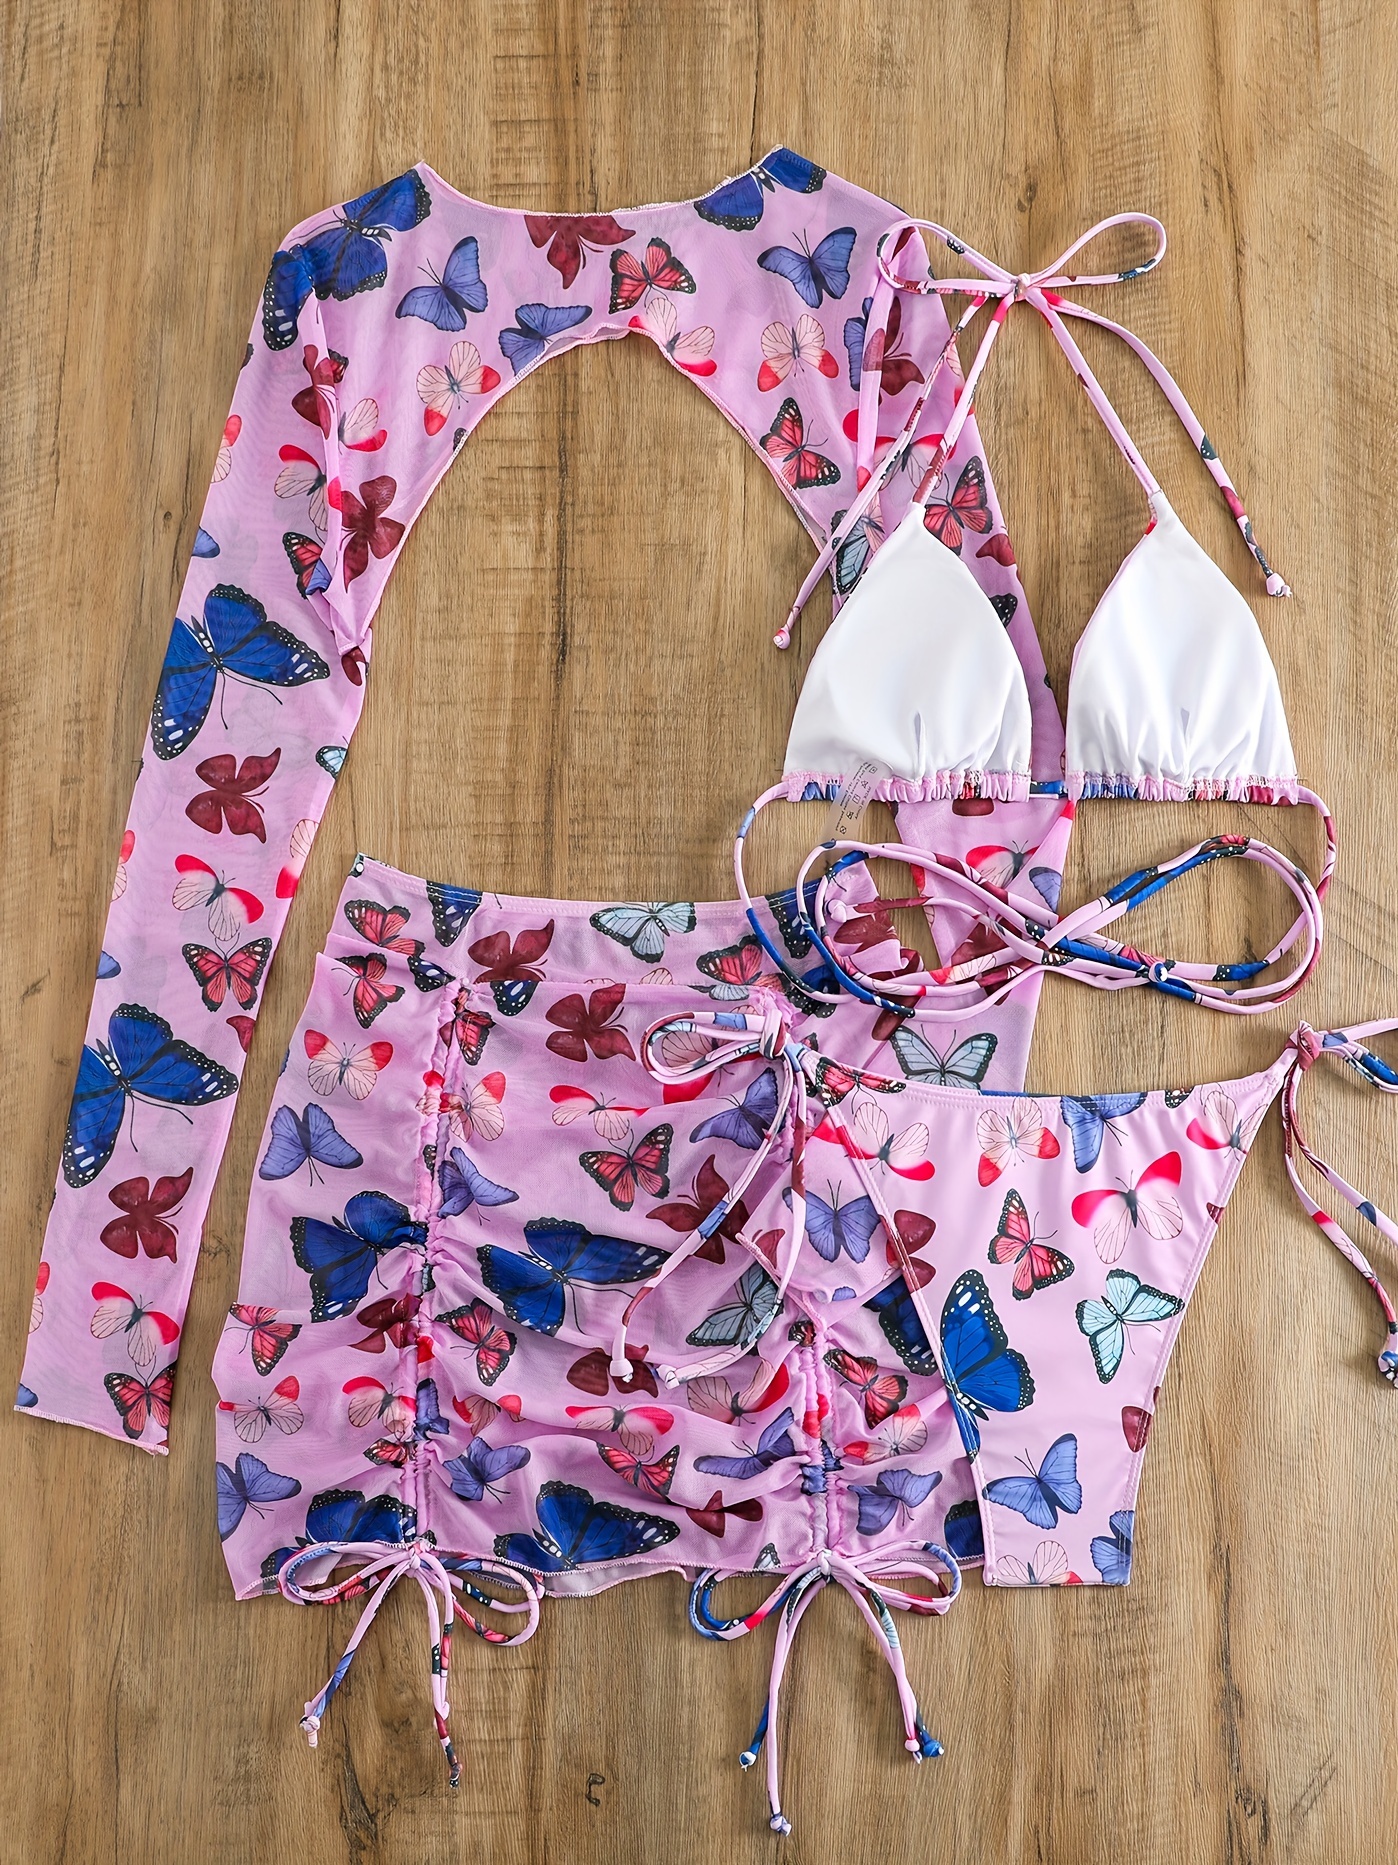 Sexy Butterfly Print Women's Lace Up Bikini Sets Floral And